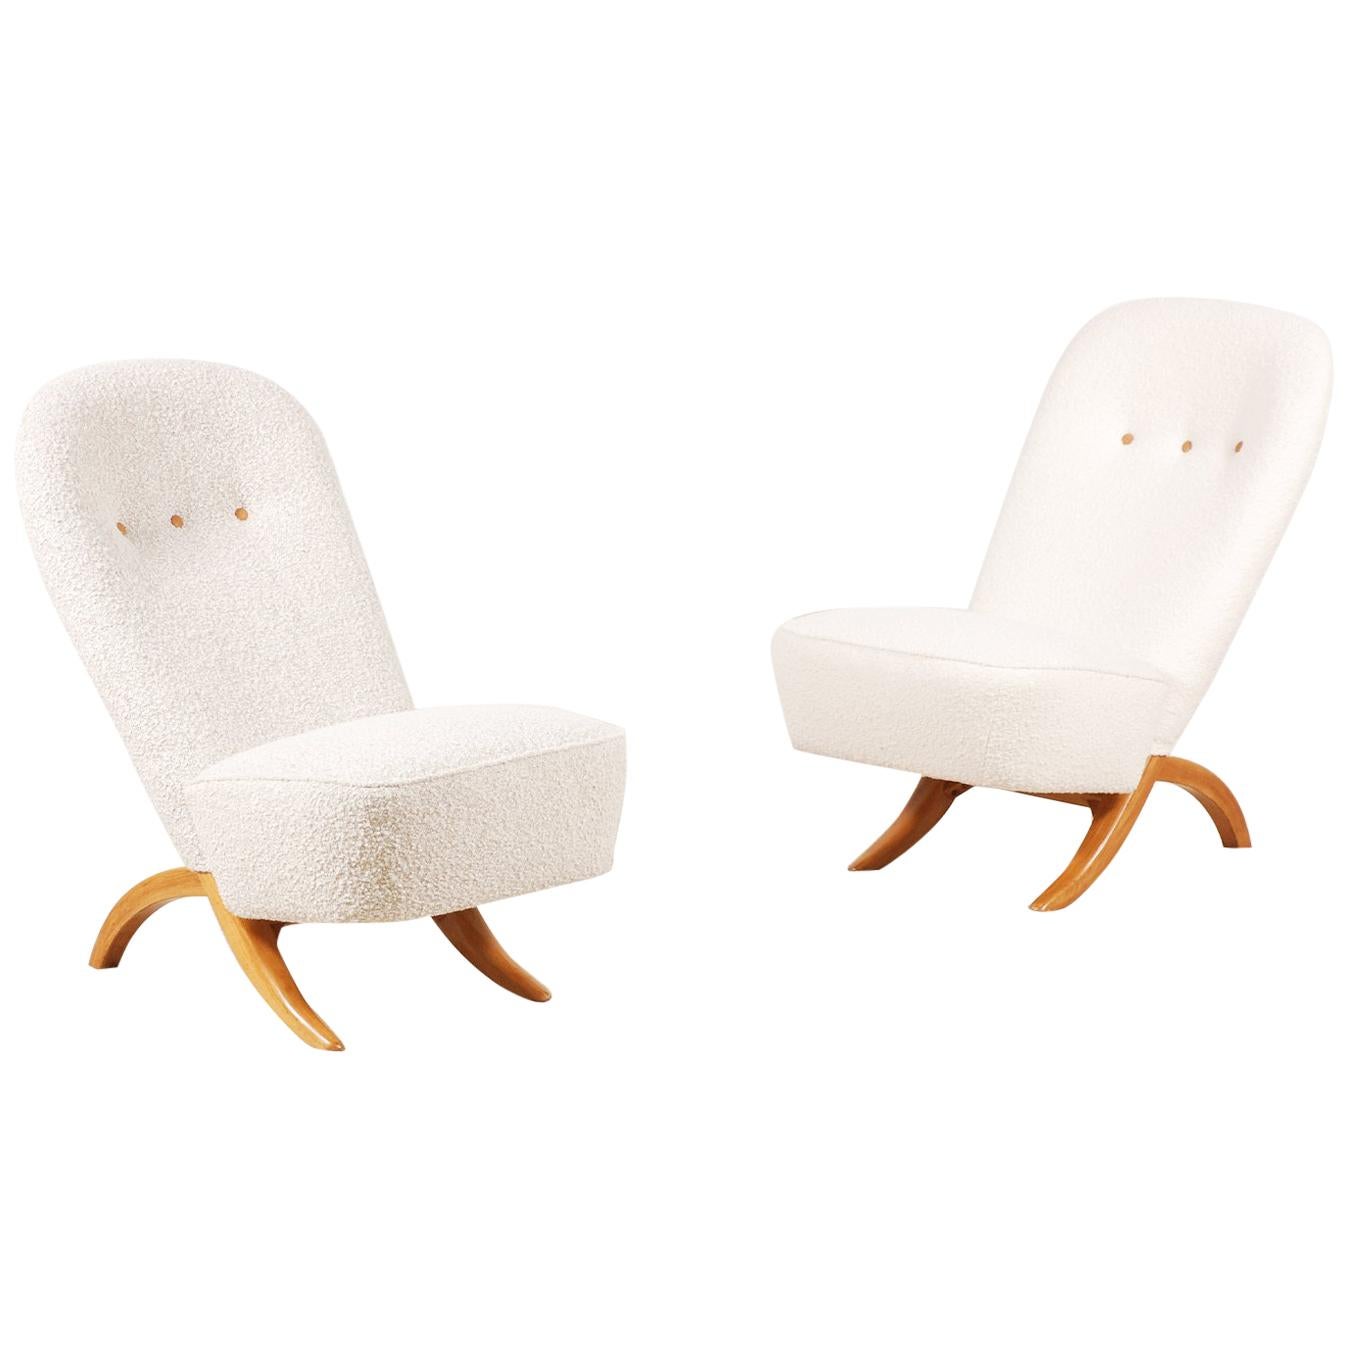 Theo Ruth, Pair of "Congo" Lounge Chairs for Artifort, circa 1950